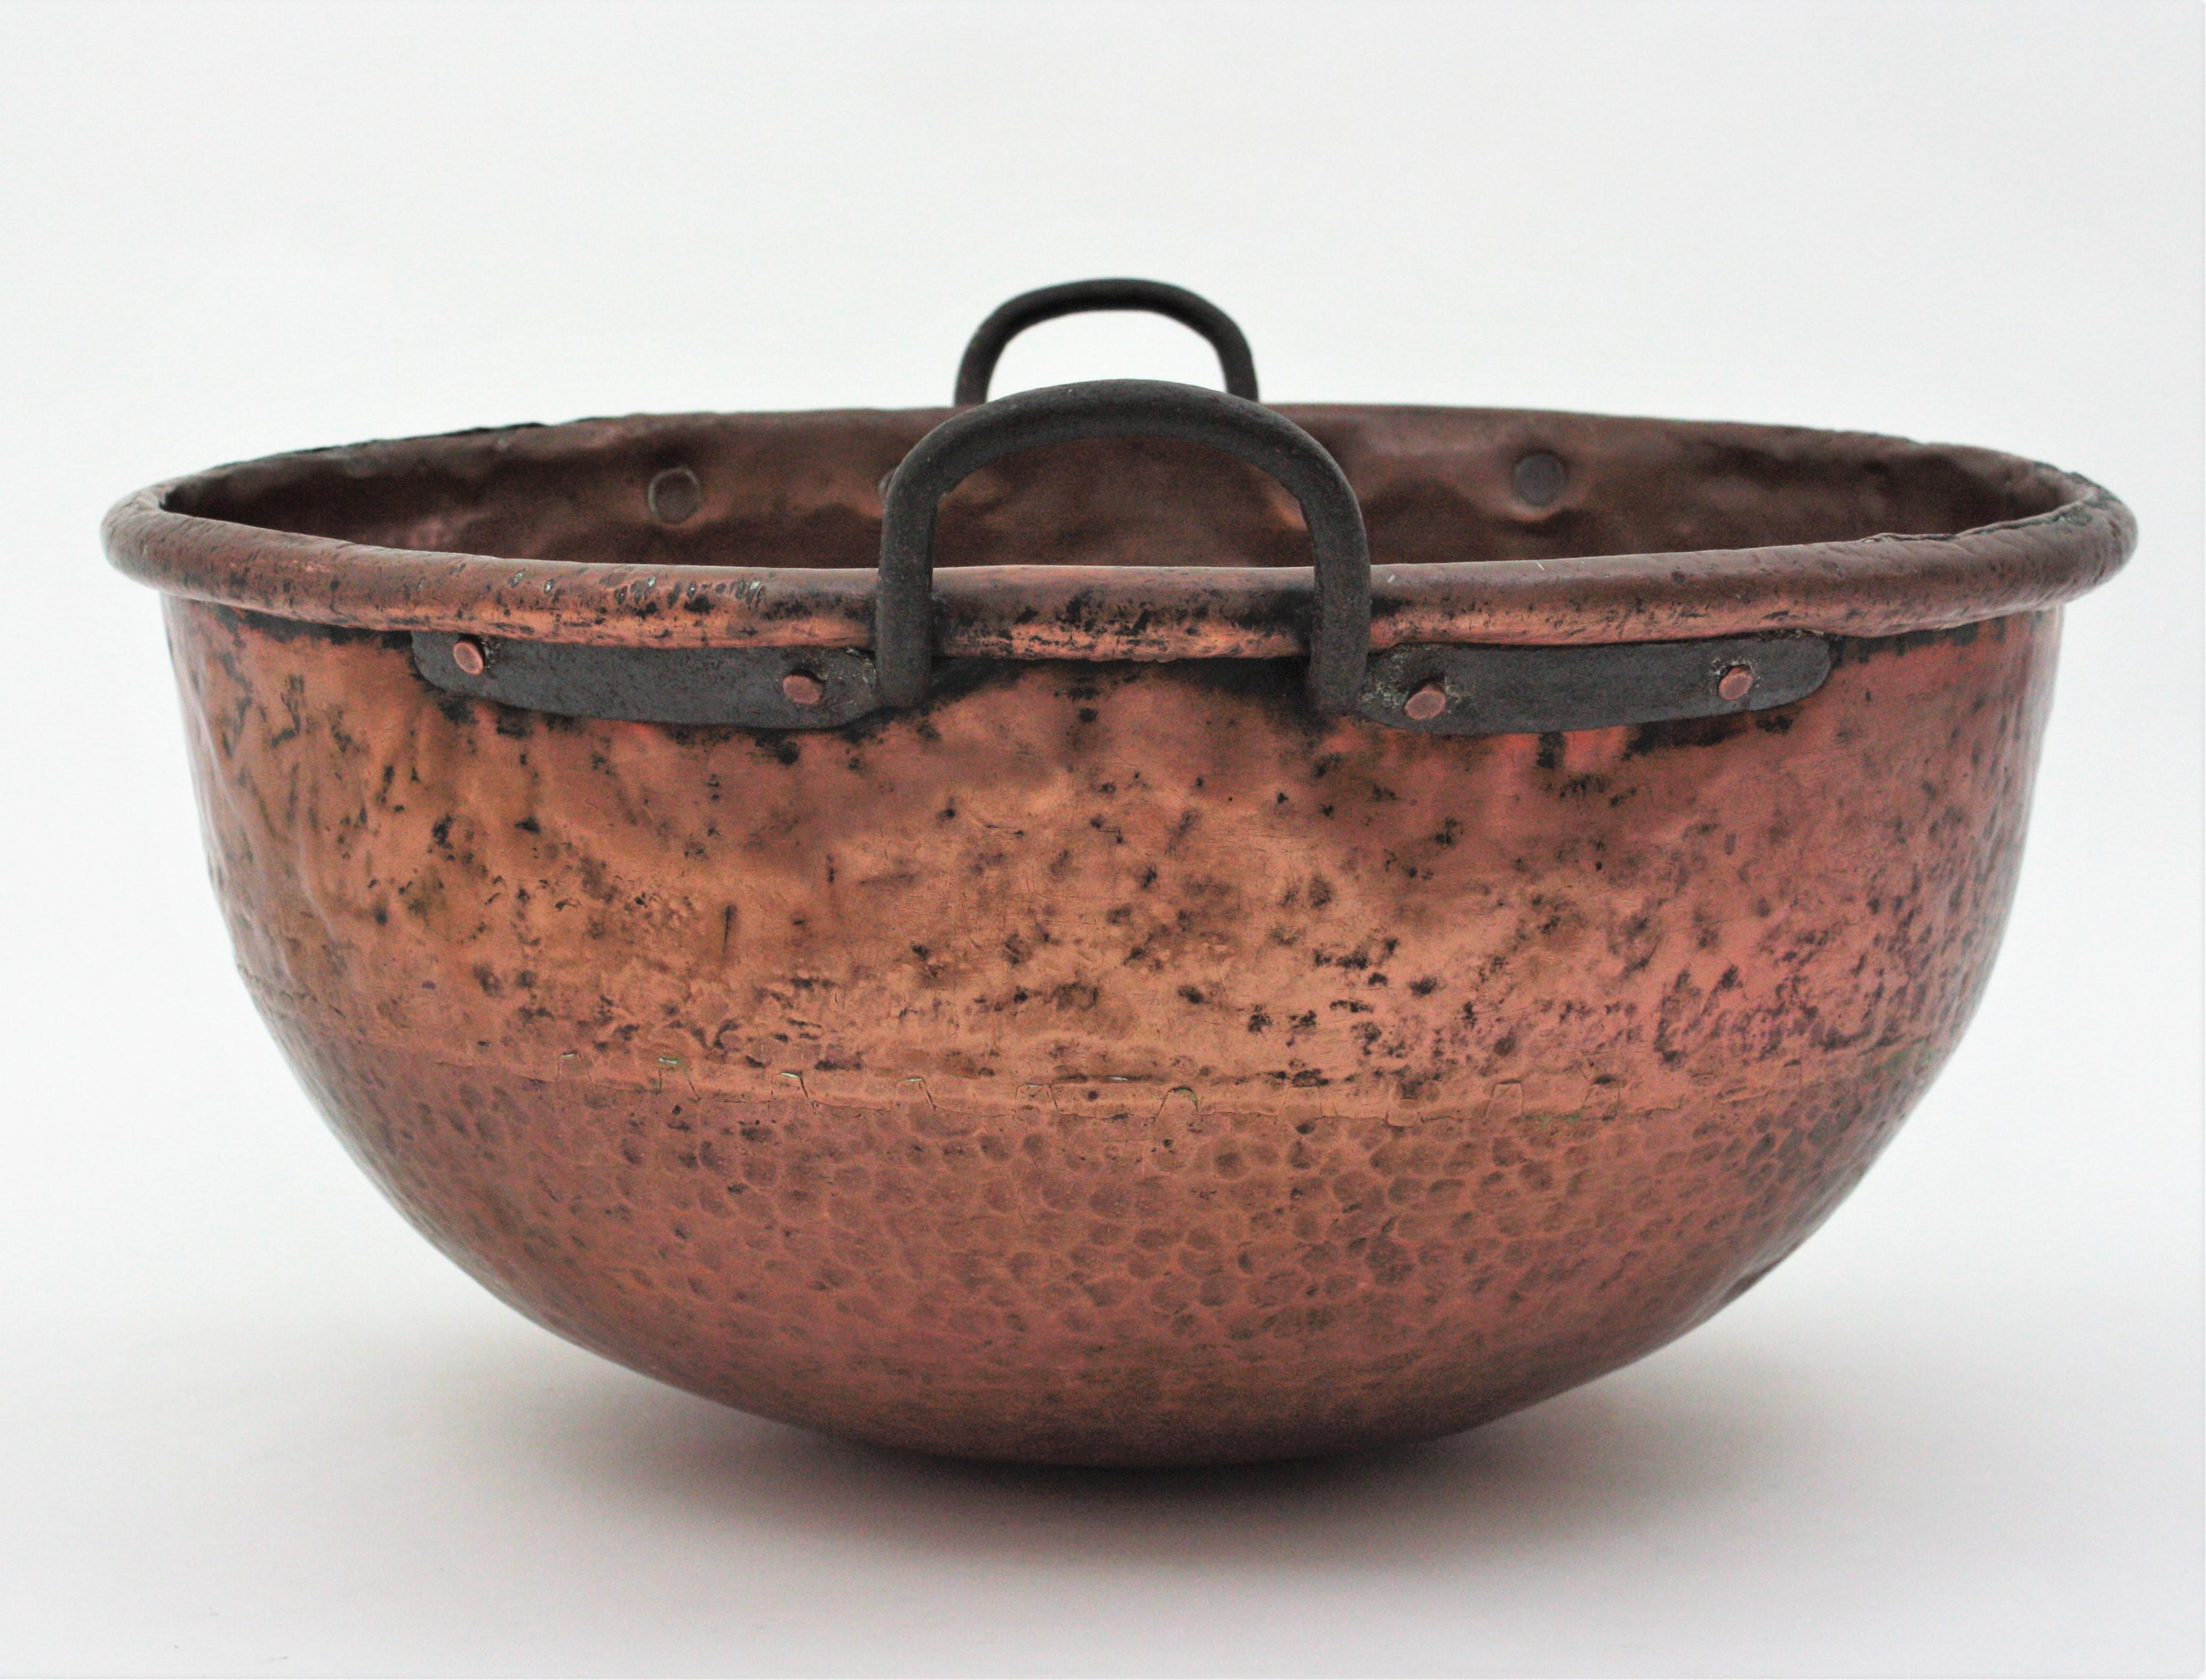 Rustic Massive French Copper Cauldron Pot with Iron Handles